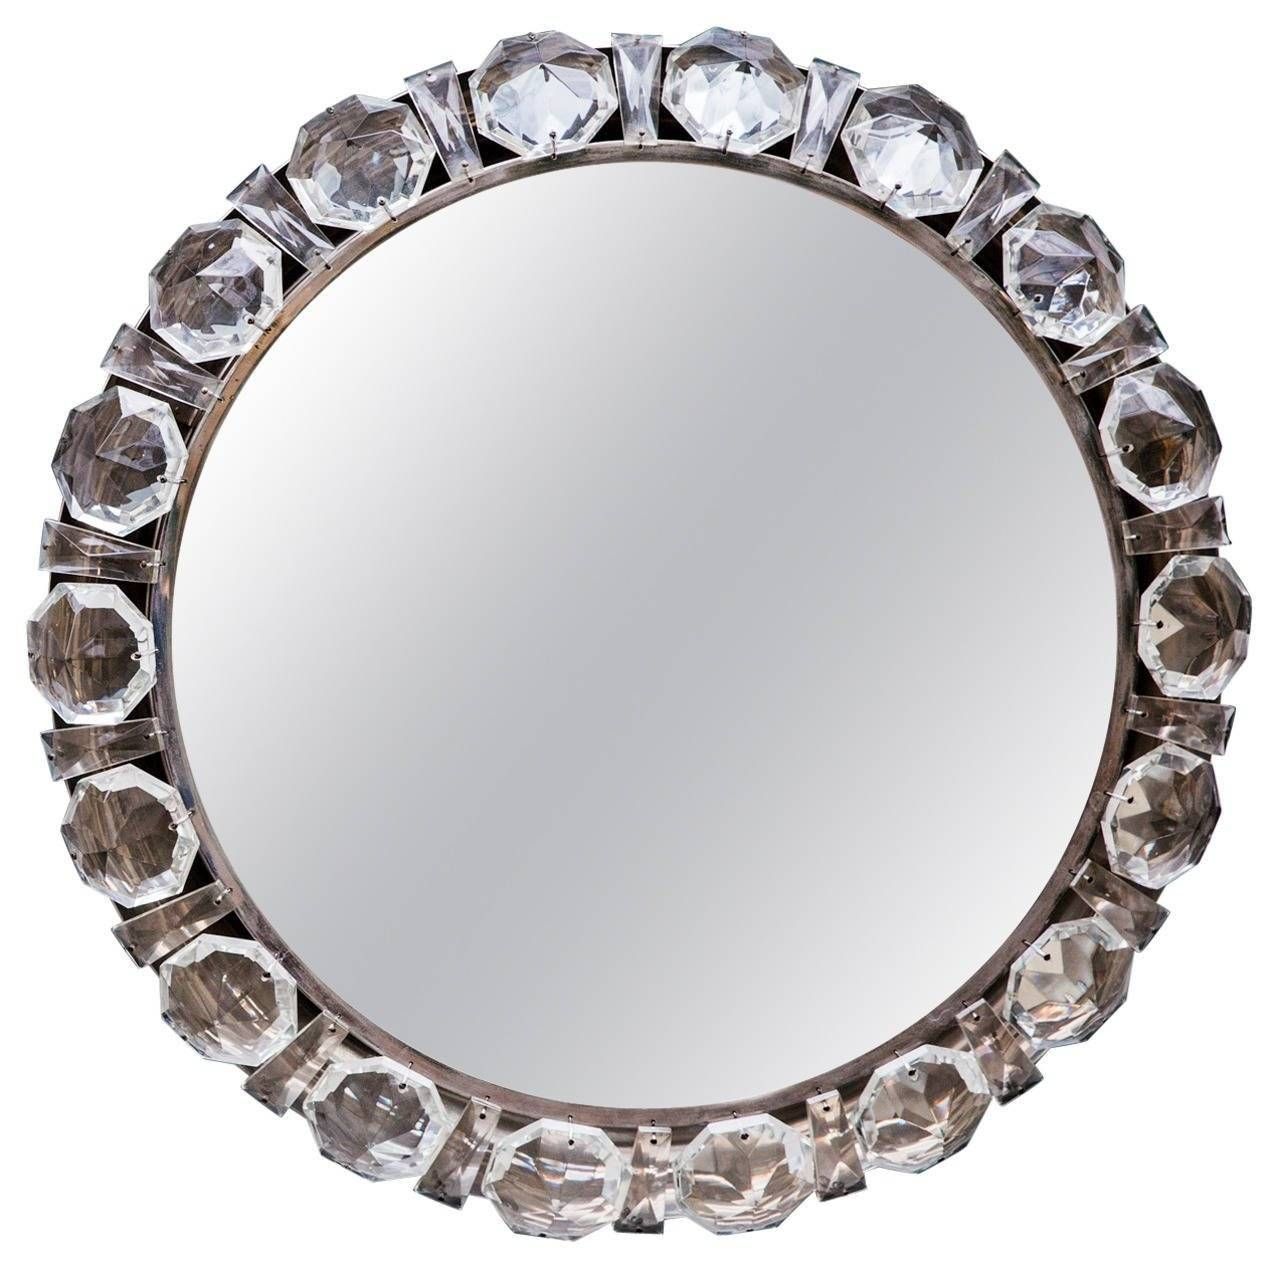 Illuminated Bakalowits Wall Mirror With Glass Crystals At 1stdibs For Wall Mirrors With Crystals (View 25 of 25)